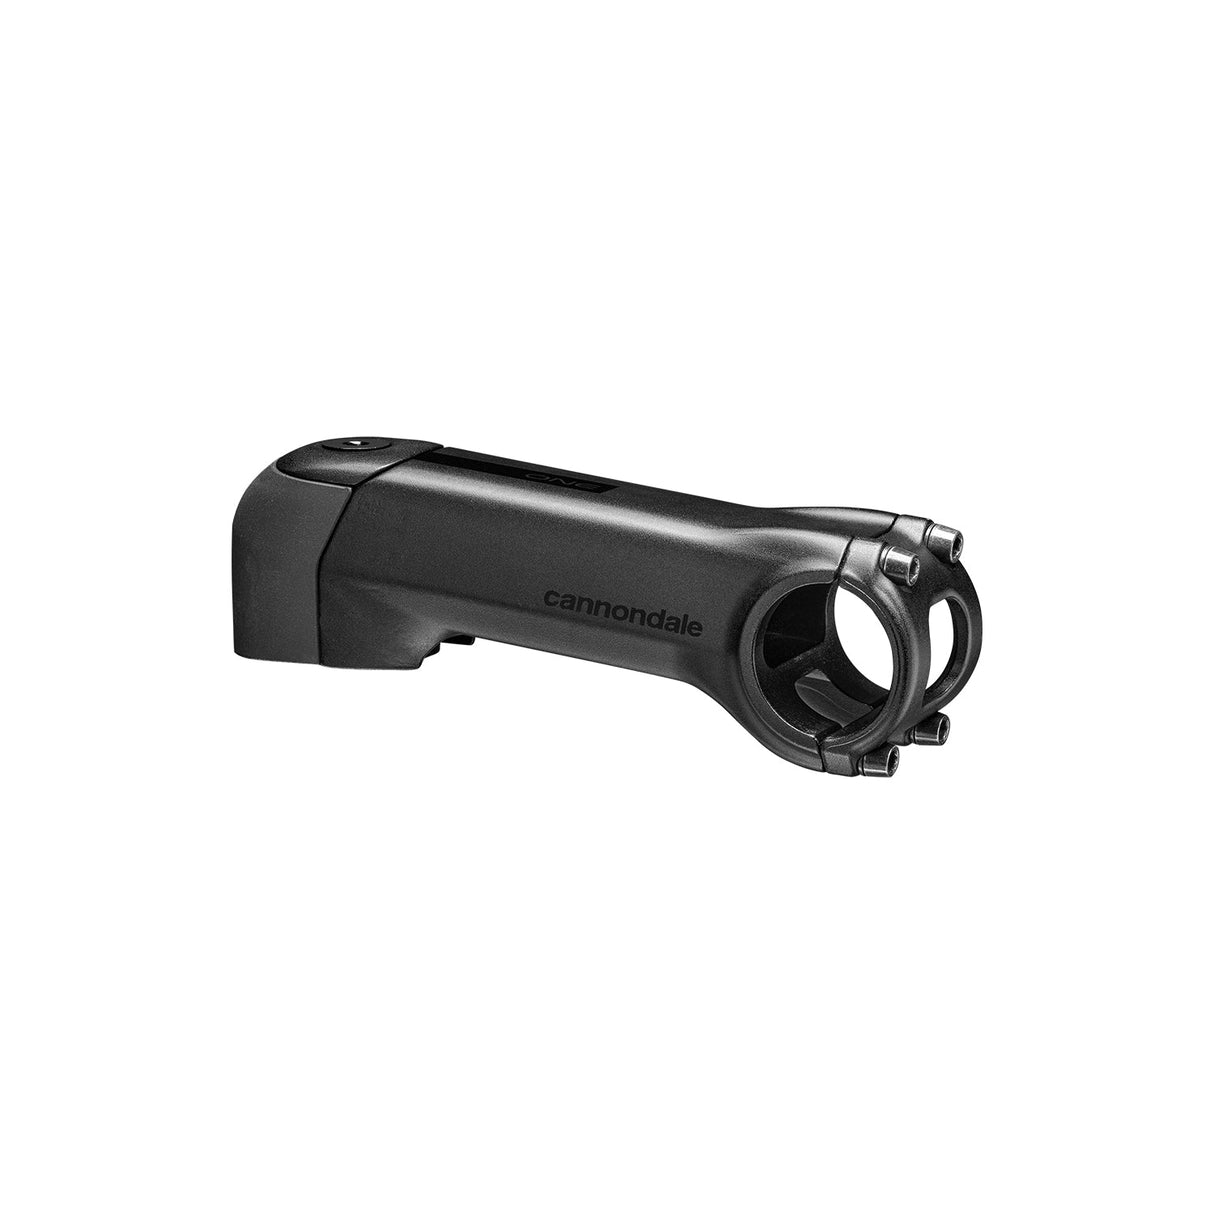 Cannondale C1 Conceal Stem Alloy -6 degree